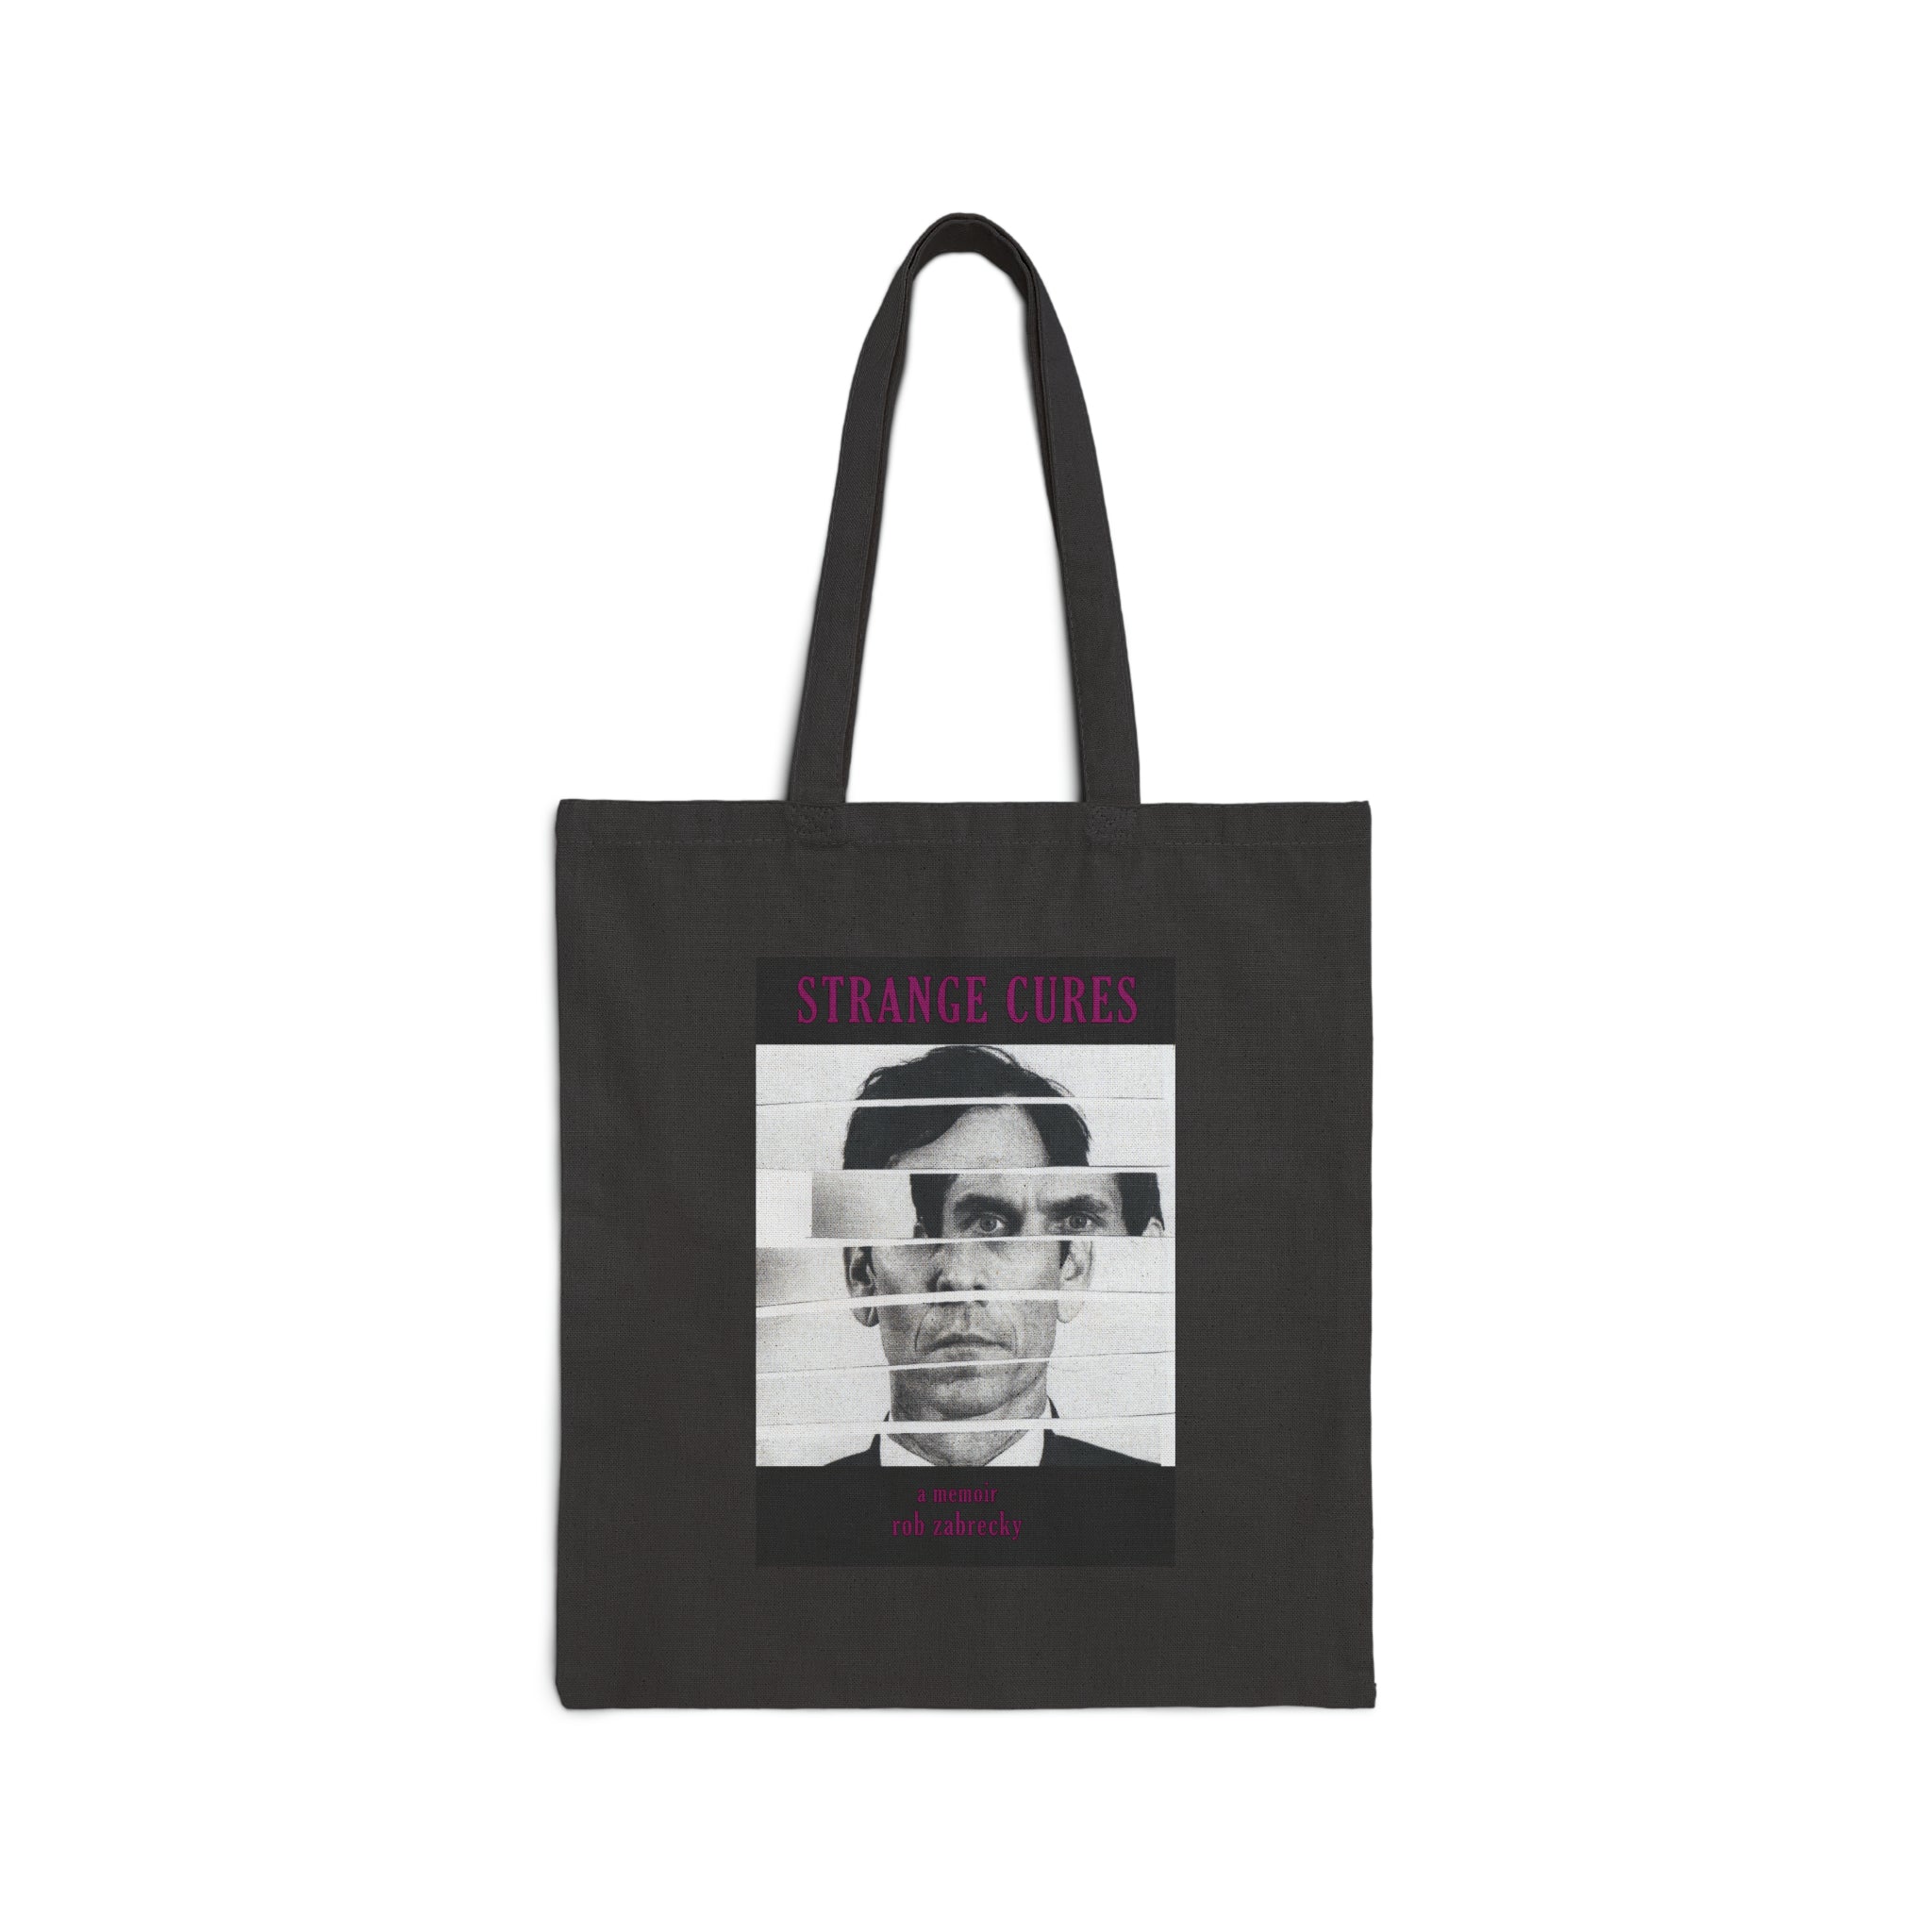 "Strange Cures" by Rob Zabrecky Cotton Canvas Tote Bag